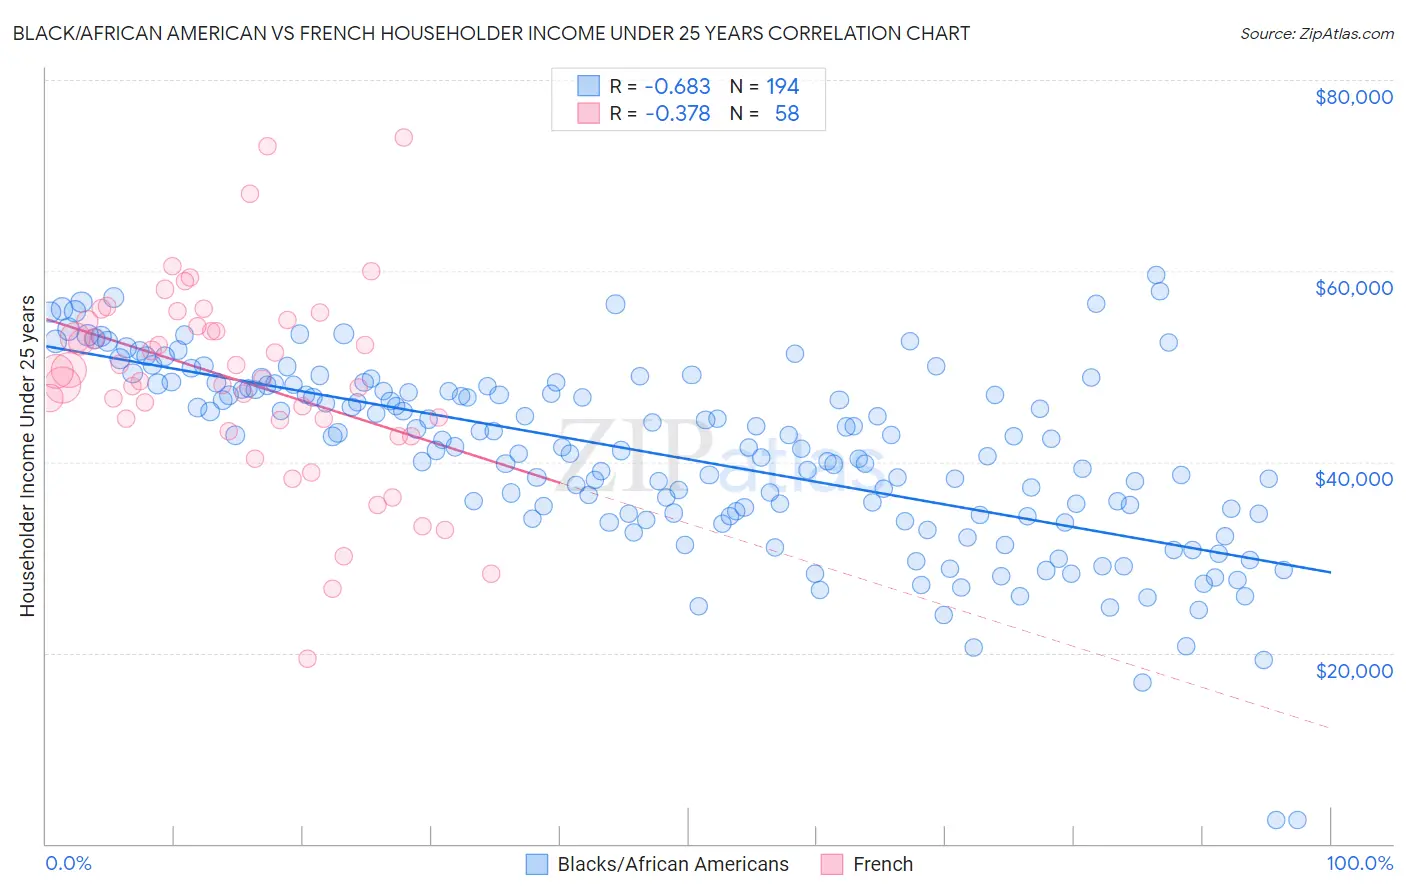 Black/African American vs French Householder Income Under 25 years